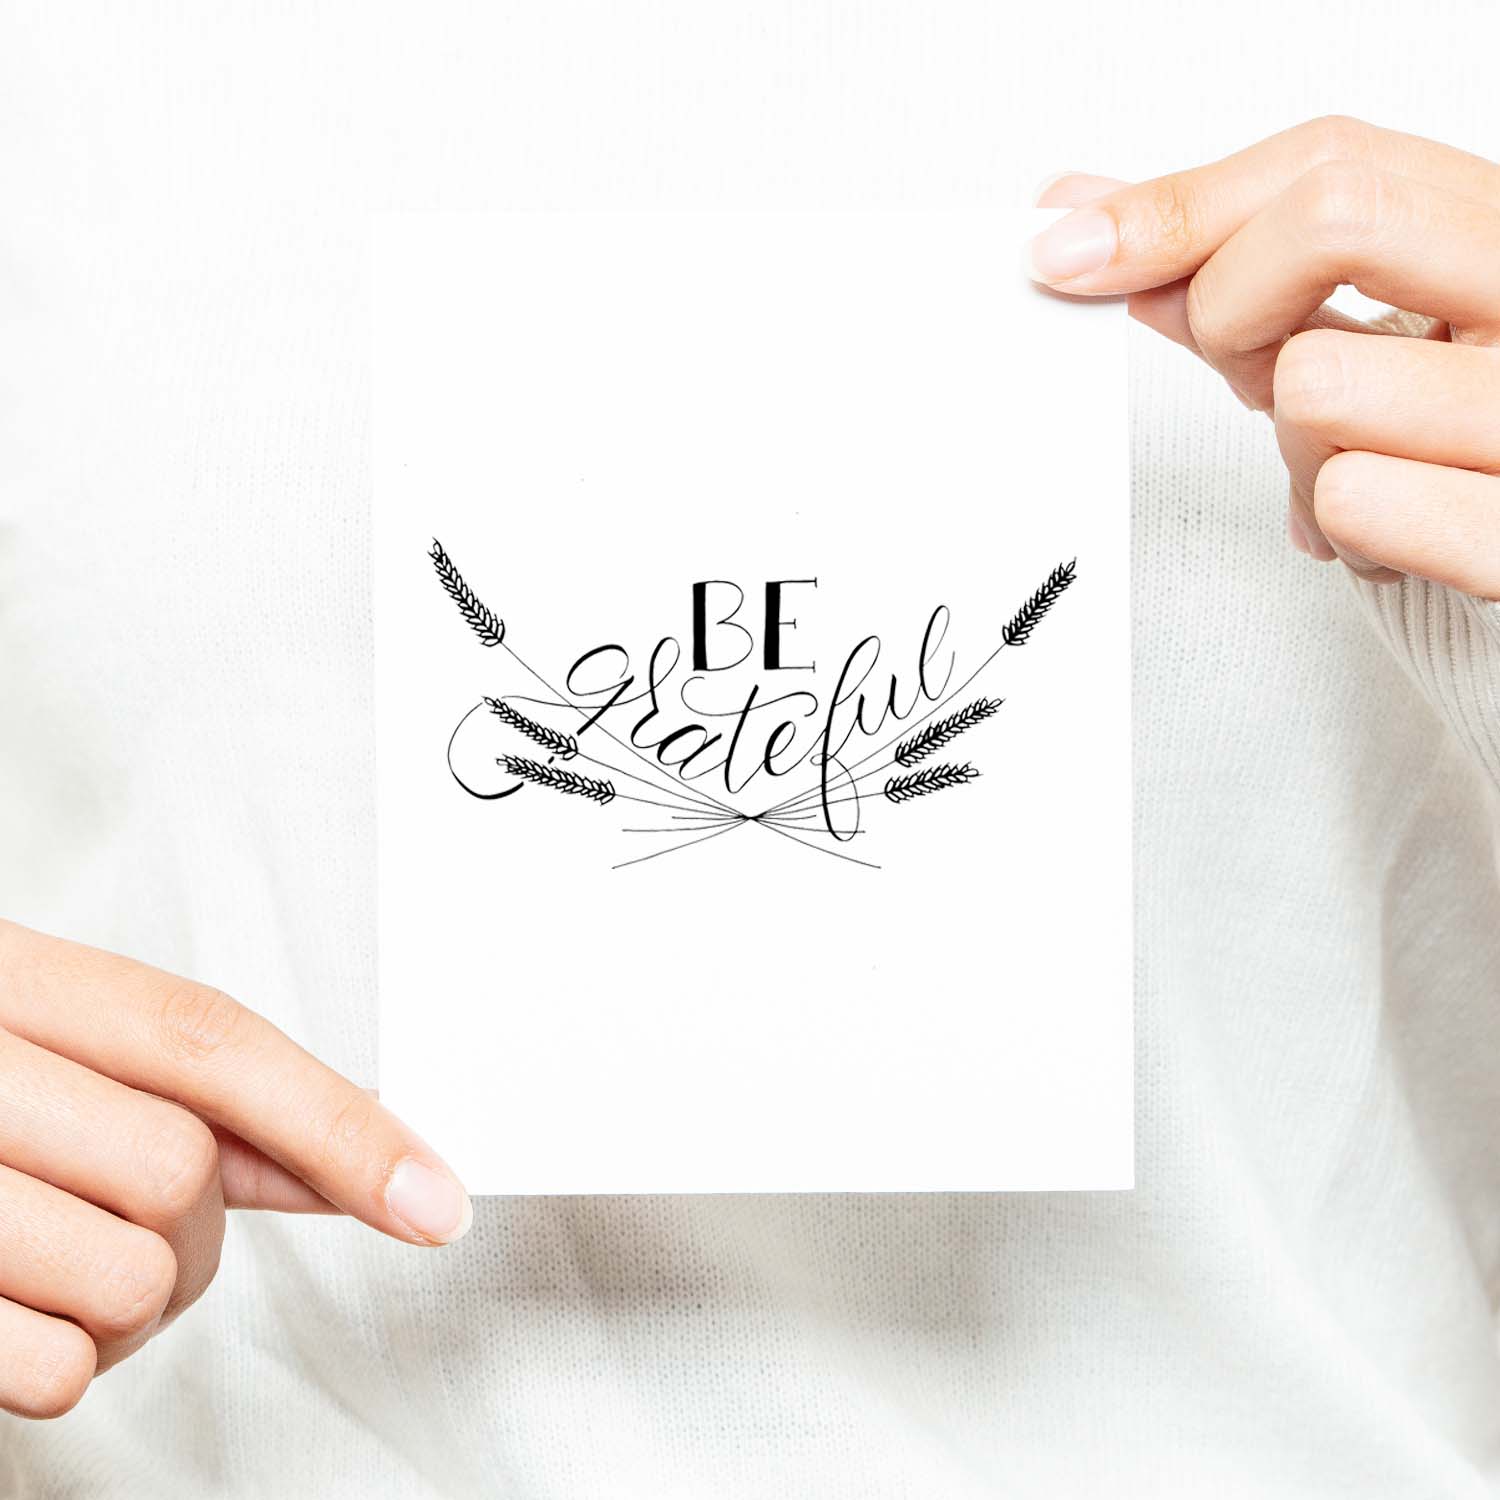 Be Grateful A2 Greeting Card, black hand lettered design with wheat illustrations on a folded white card shown with a woman in a white sweater holding card